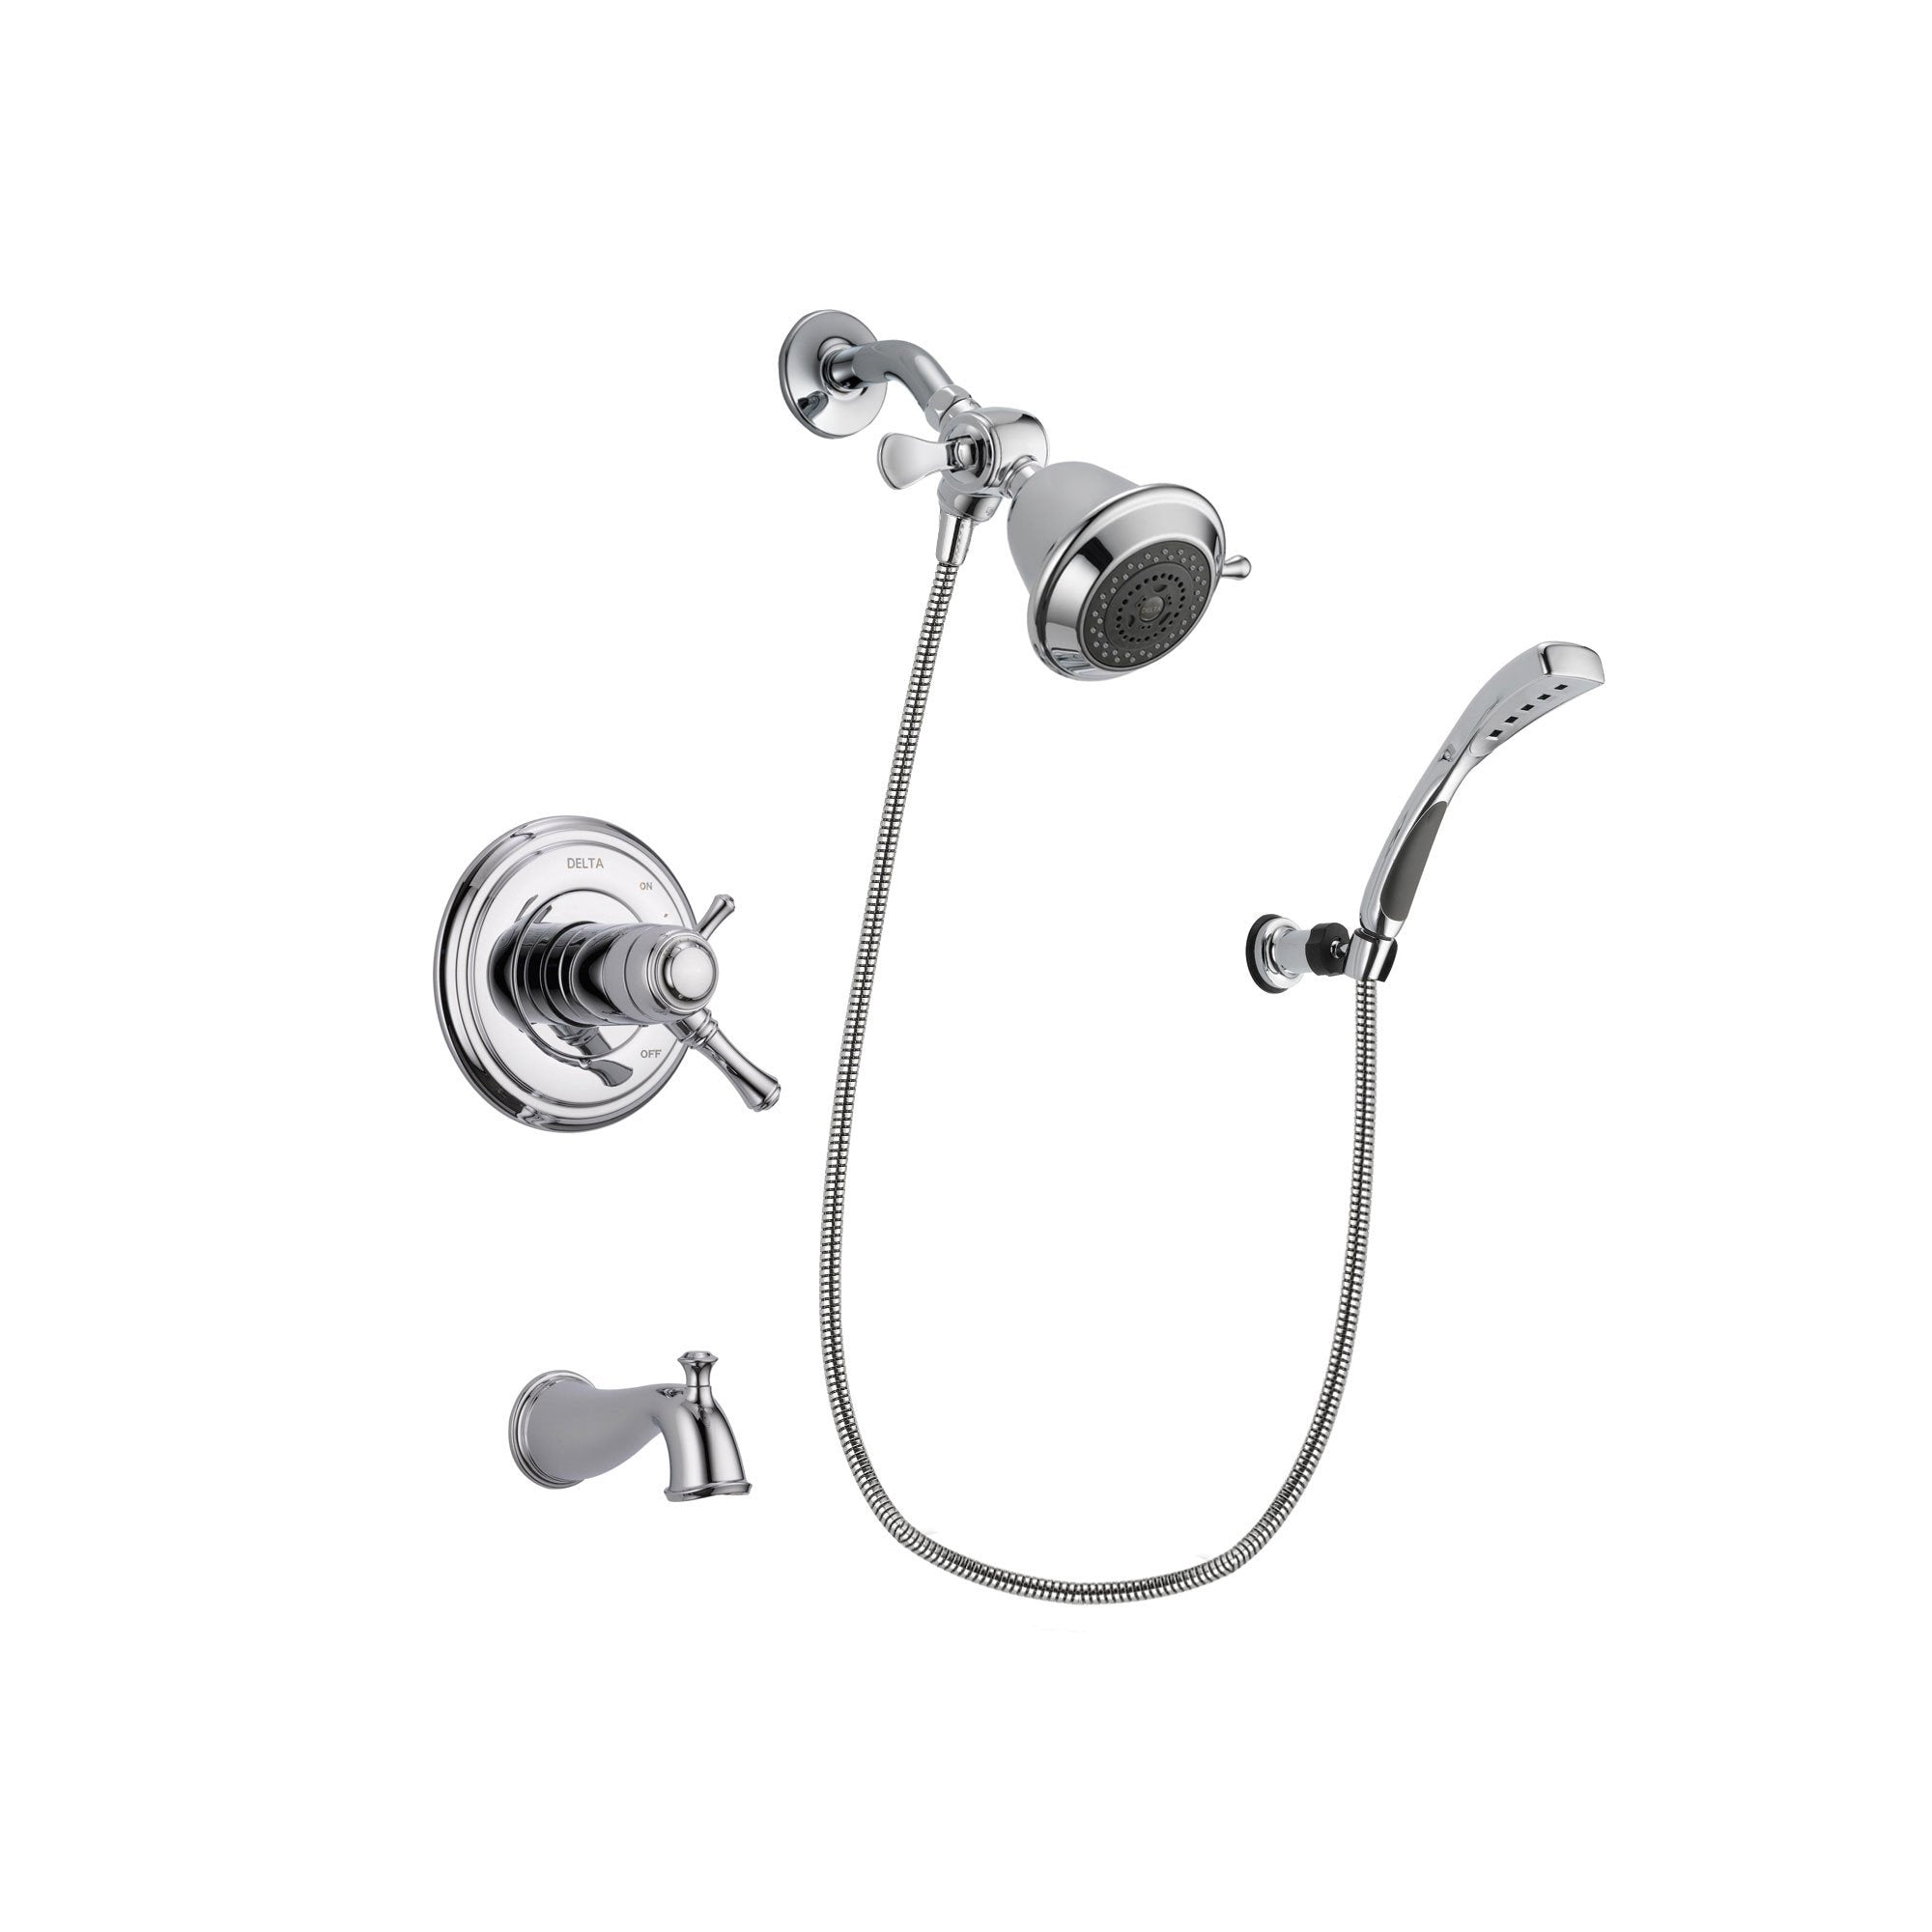 Delta Cassidy Chrome Finish Thermostatic Tub and Shower Faucet System Package with Shower Head and Wall-Mount Bracket with Handheld Shower Spray Includes Rough-in Valve and Tub Spout DSP0977V